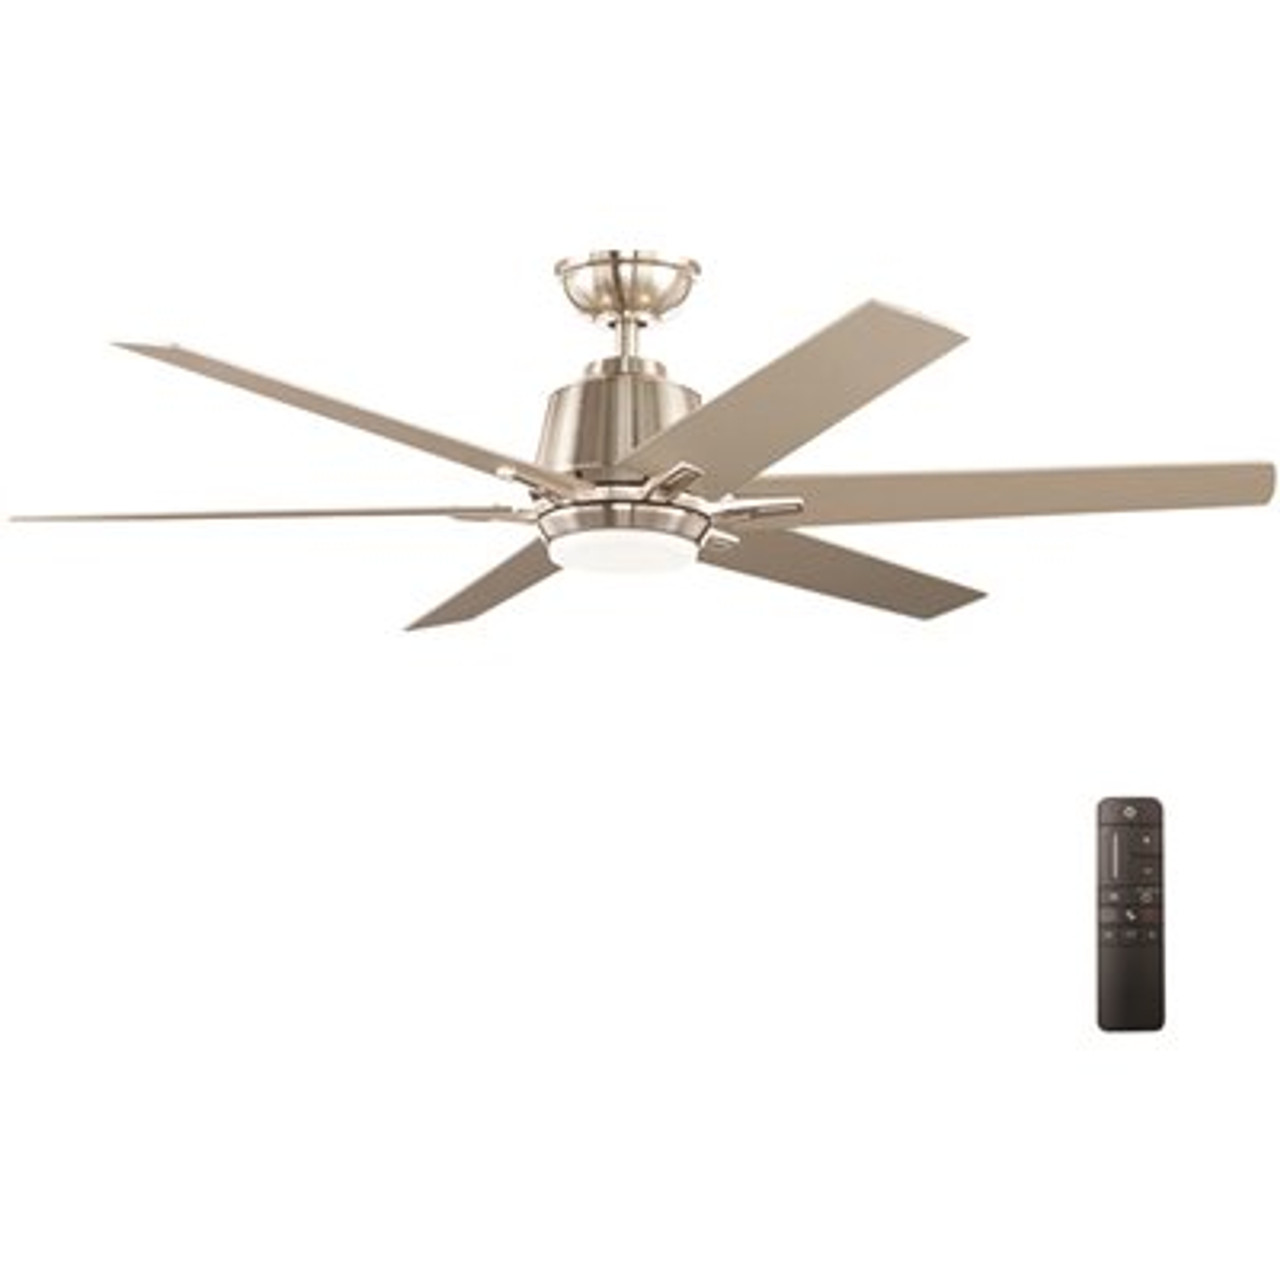 Home Decorators Collection Kensgrove 54 In. Integrated Led Brushed Nickel Ceiling Fan With Light And Remote Control